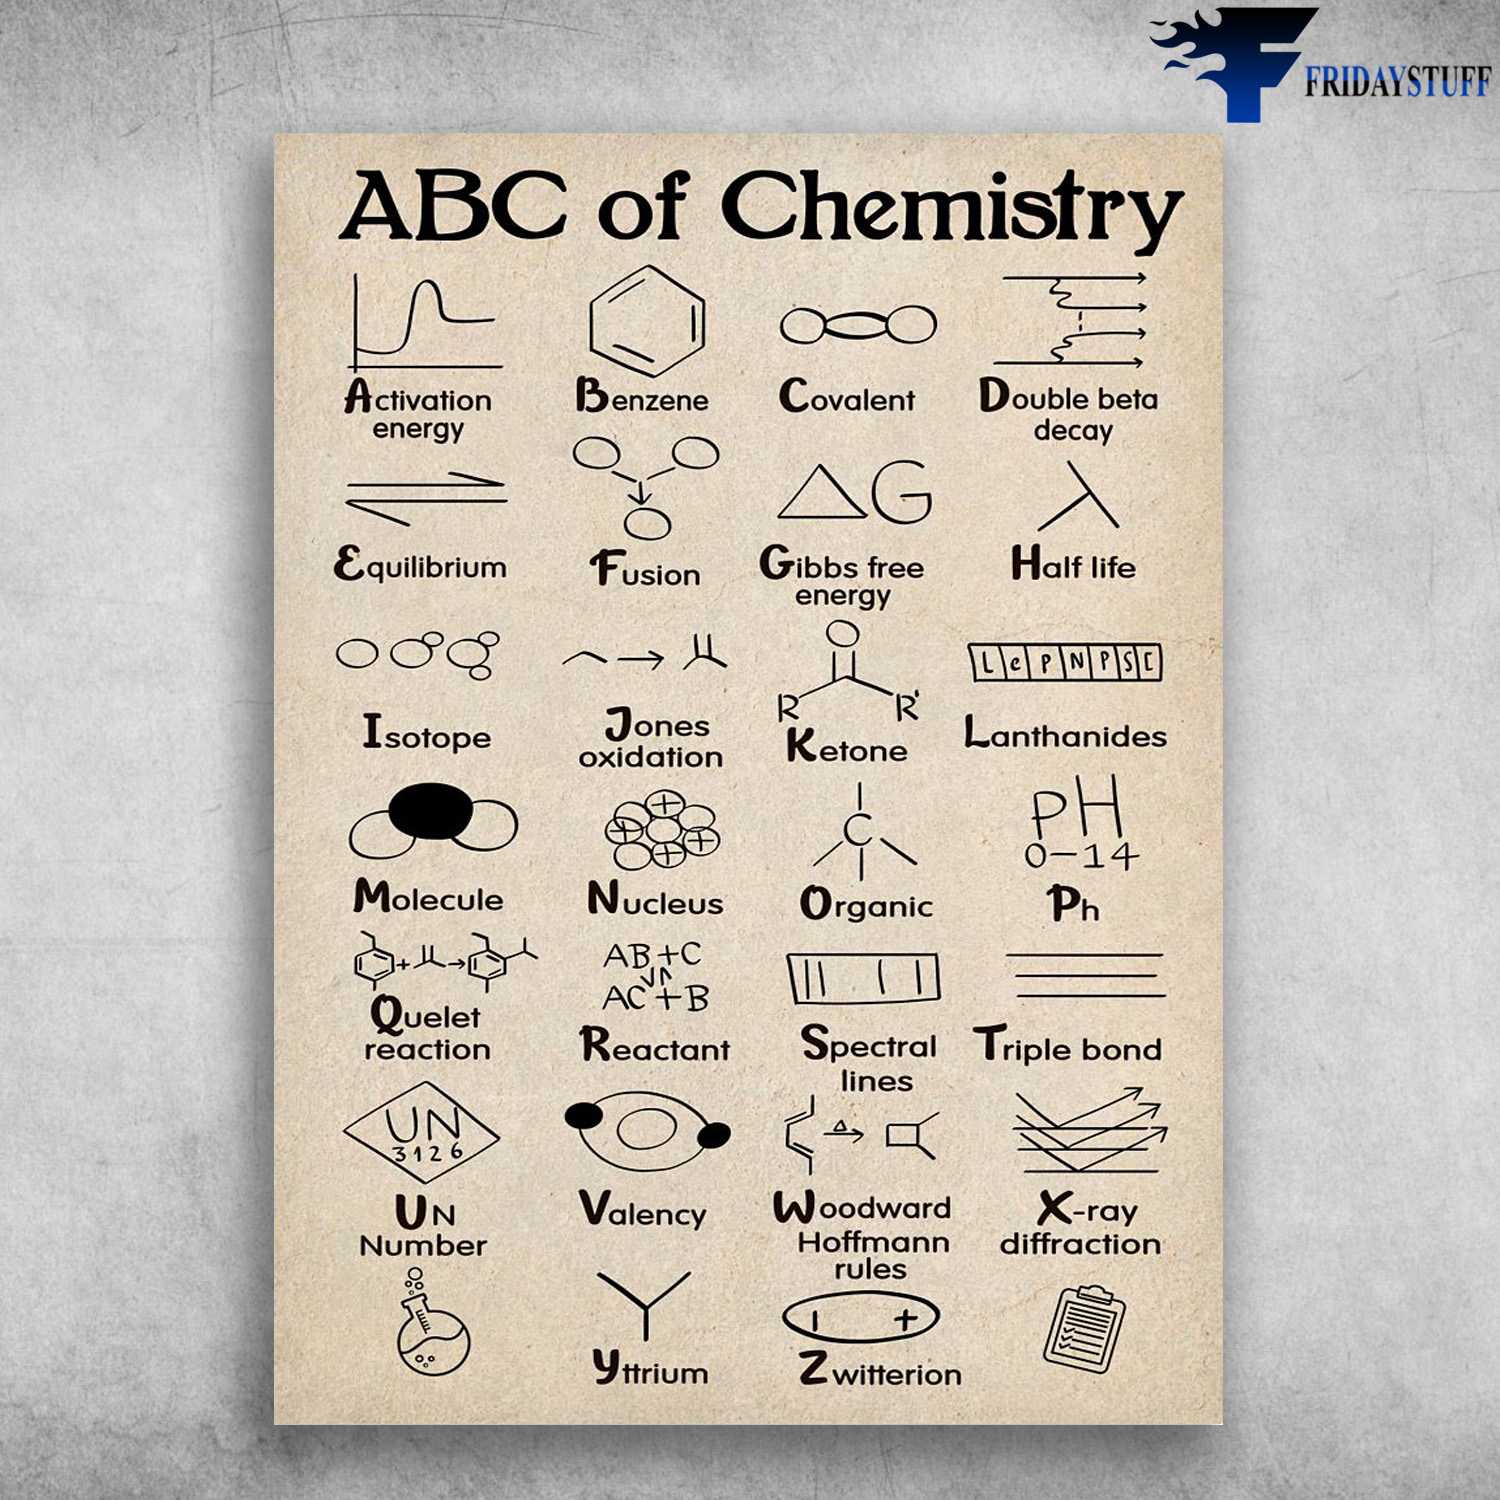 ABC Of CHemistry, Chemistry Poster, Activation Energy, Benzene, Covalent, Double Beta Decay